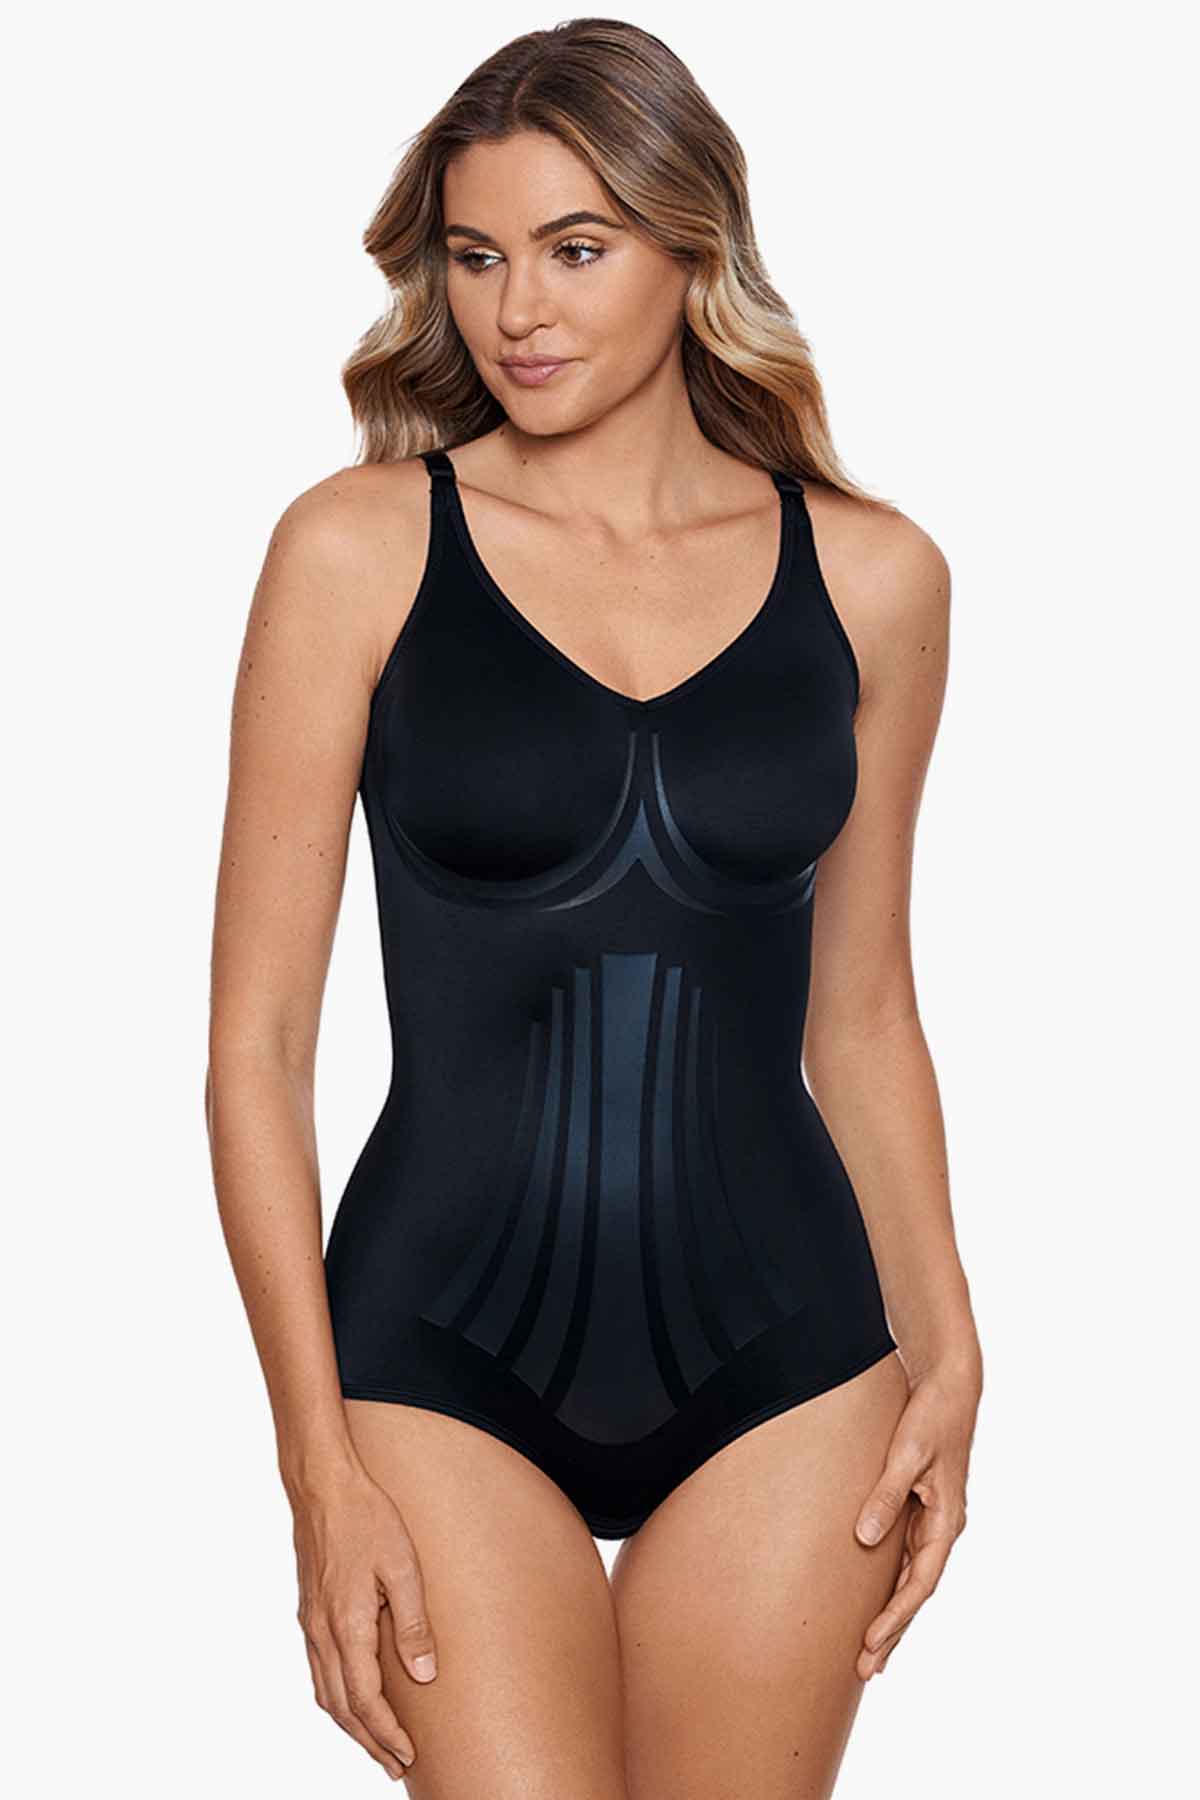 Back Magic Bodybriefer Cupless Body Shaper by Miraclesuit Shapewear Online, THE ICONIC